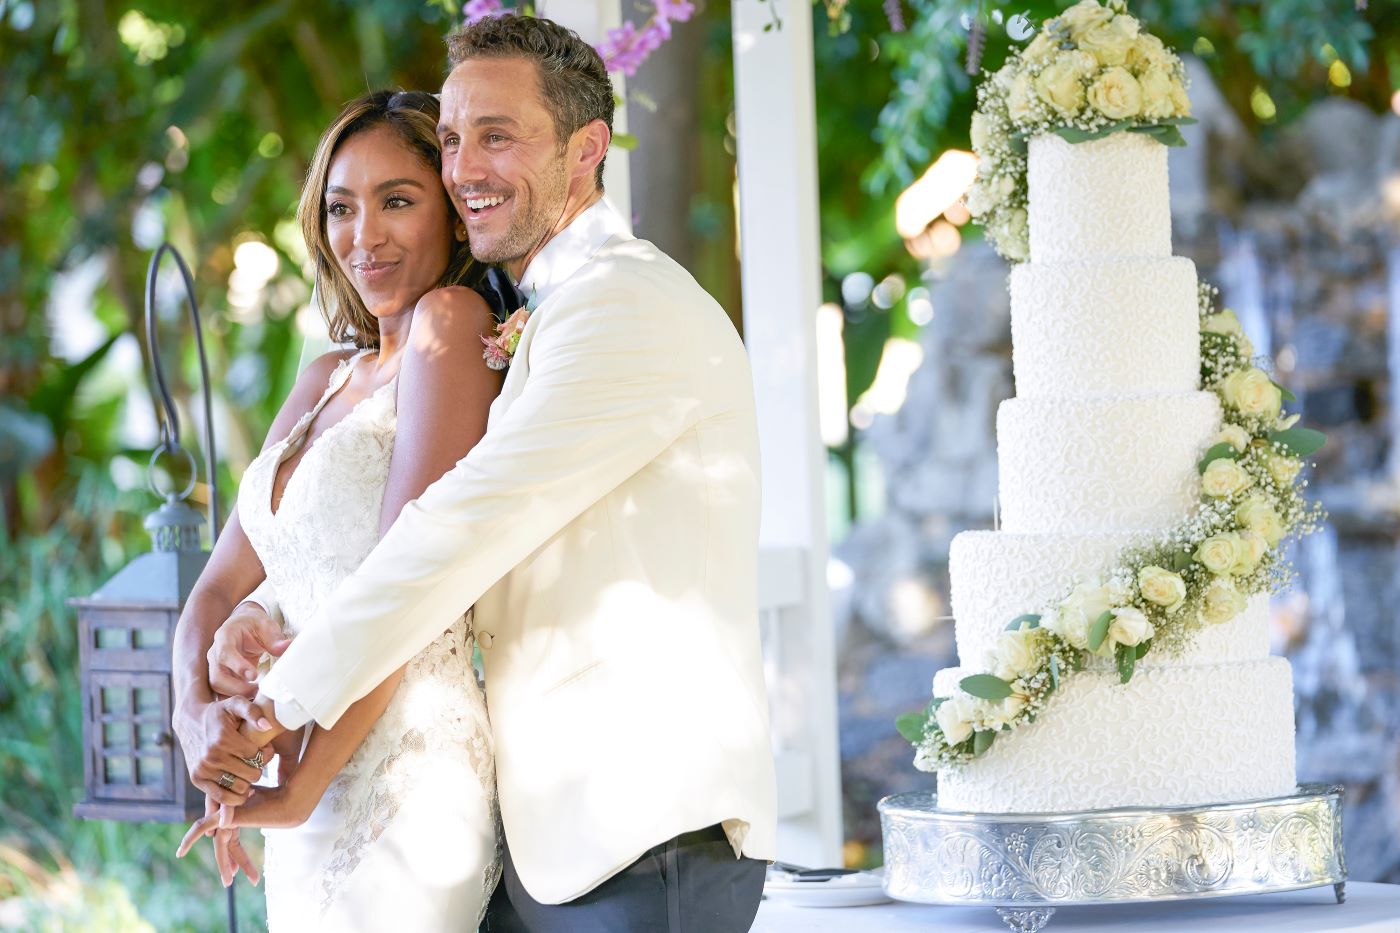 Tayshia and Zac are dressed in wedding attire, Tayshia in a white dress and Zac in a white suit, standing in front of a white wedding cake. Which 'Bachelorette' couples are still together?